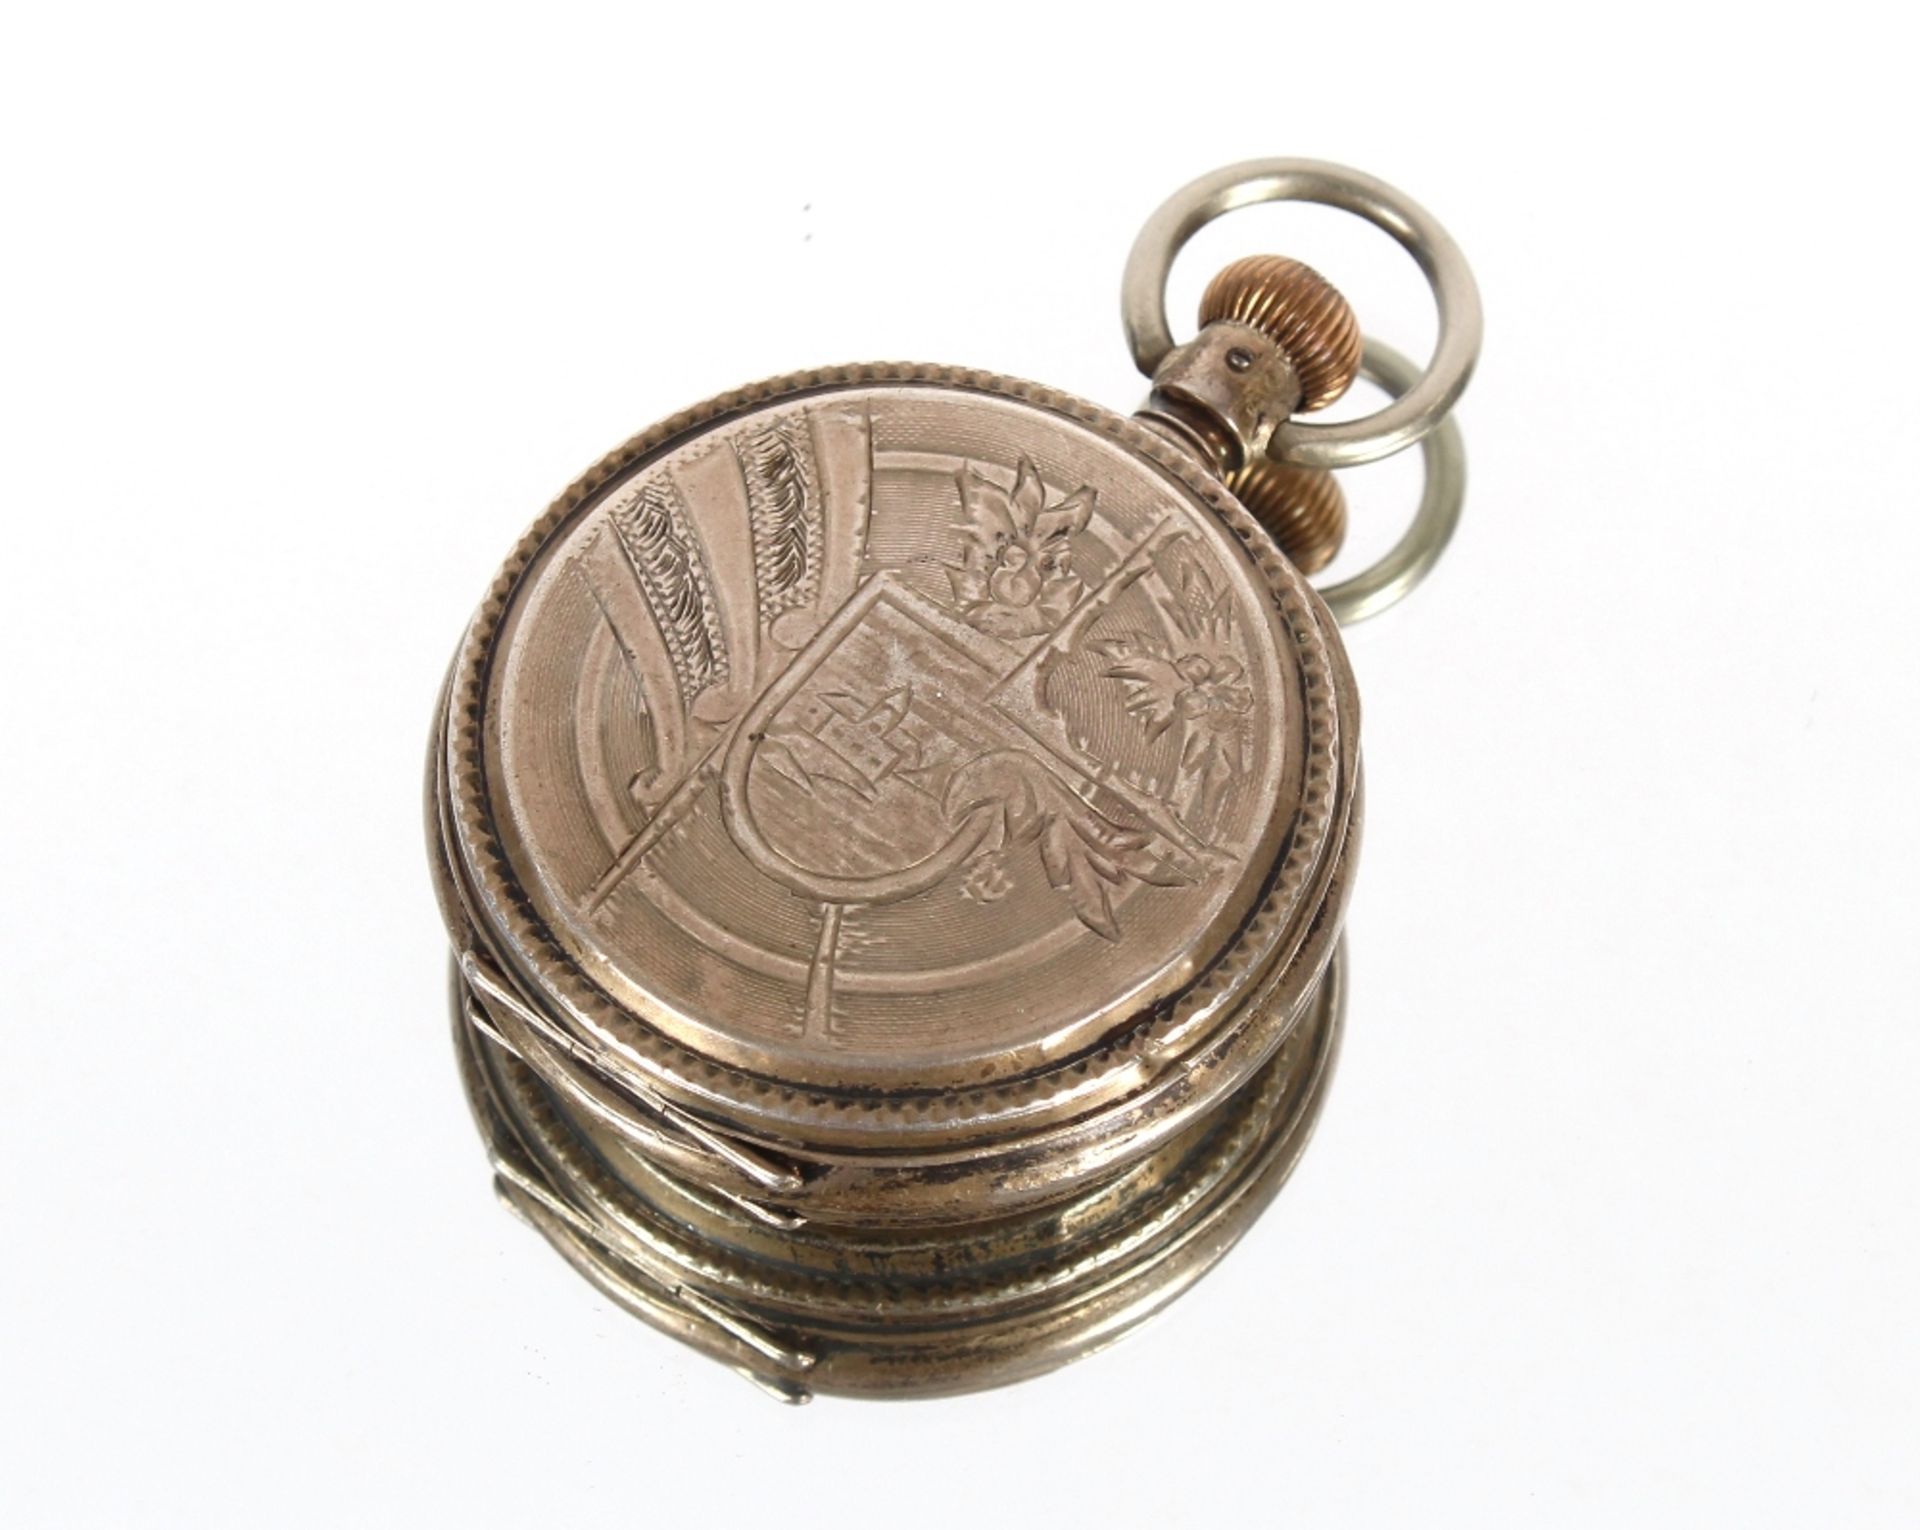 An American Standard Watch Co. of New York silver top wound pocket watch - Image 3 of 5